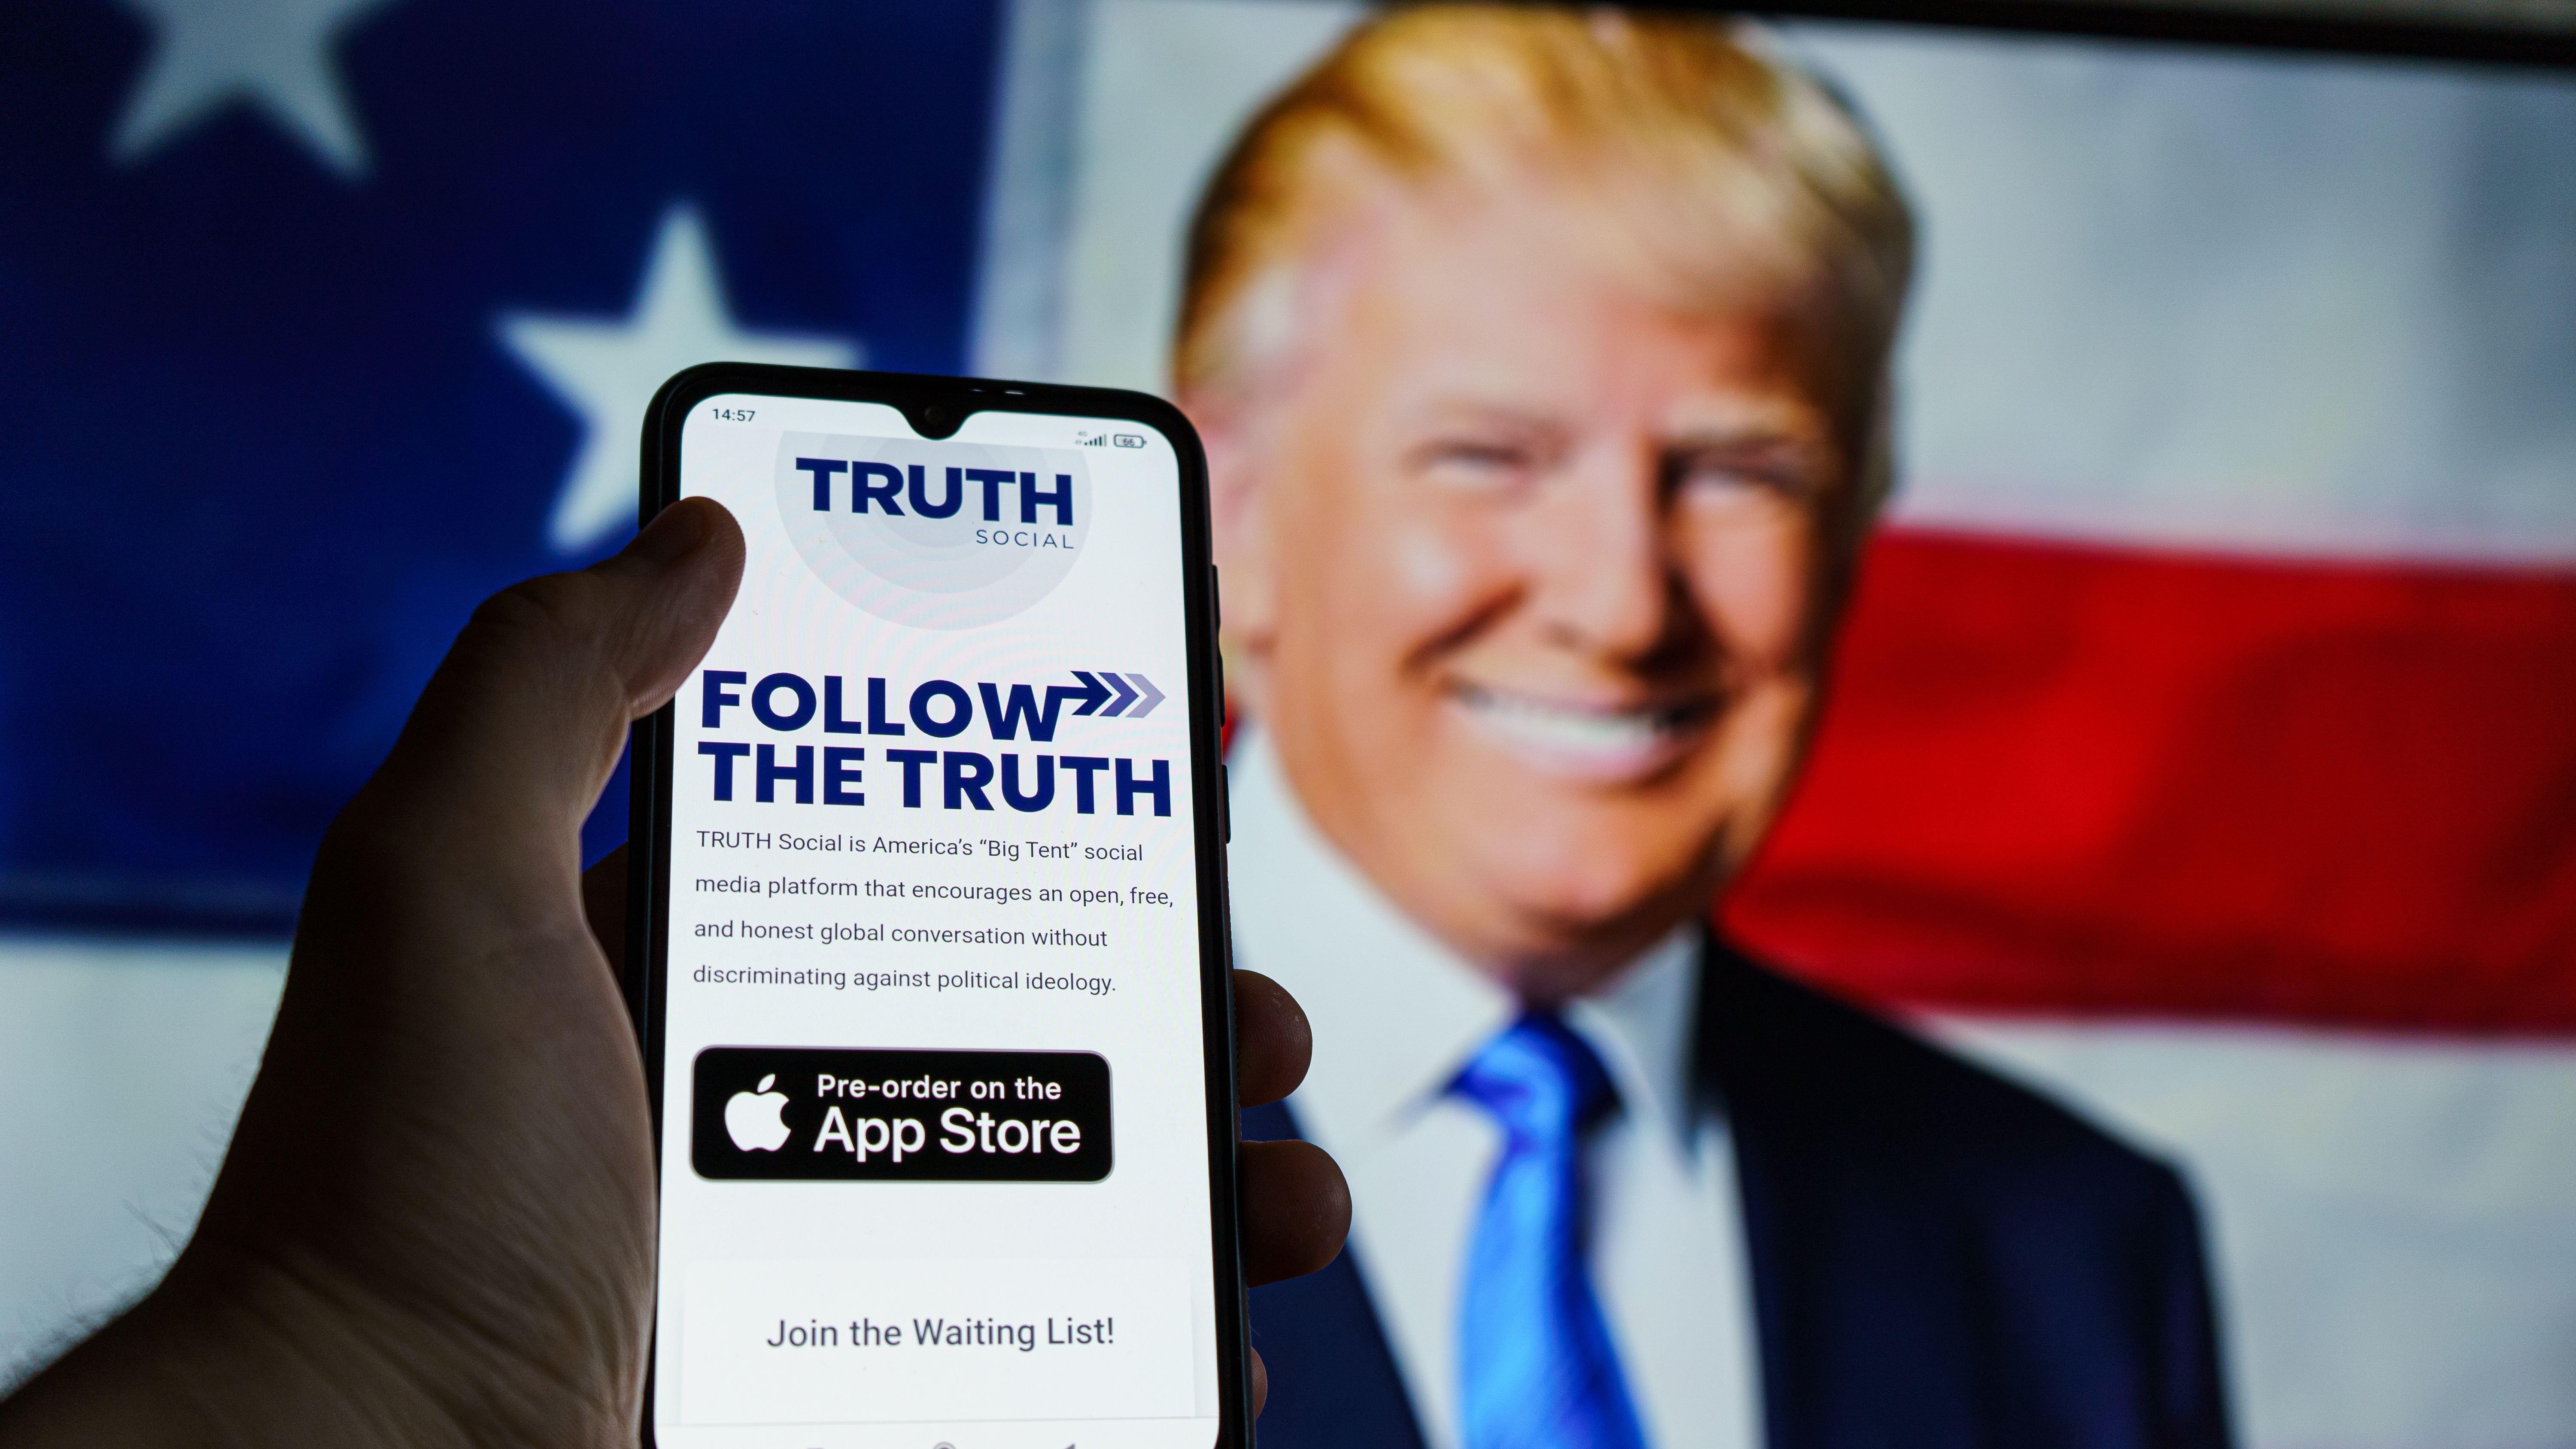 The Truth Social app is seen on a smartphone in front of an image of former President Donald Trump